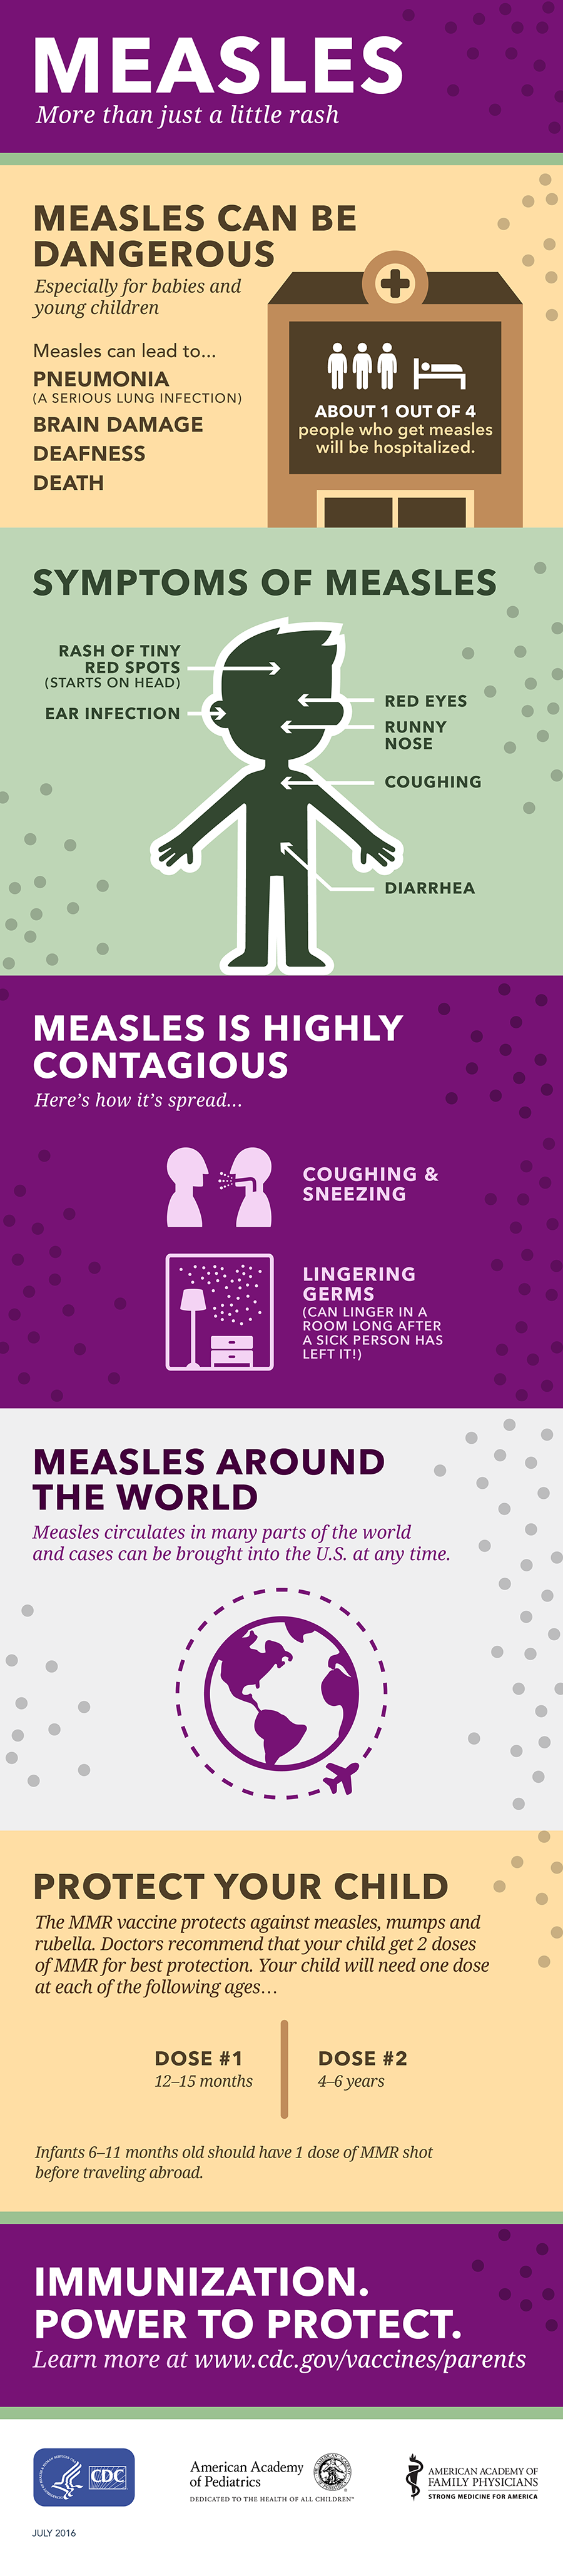 Measles Vaccine-Preventable Diseases Infographic